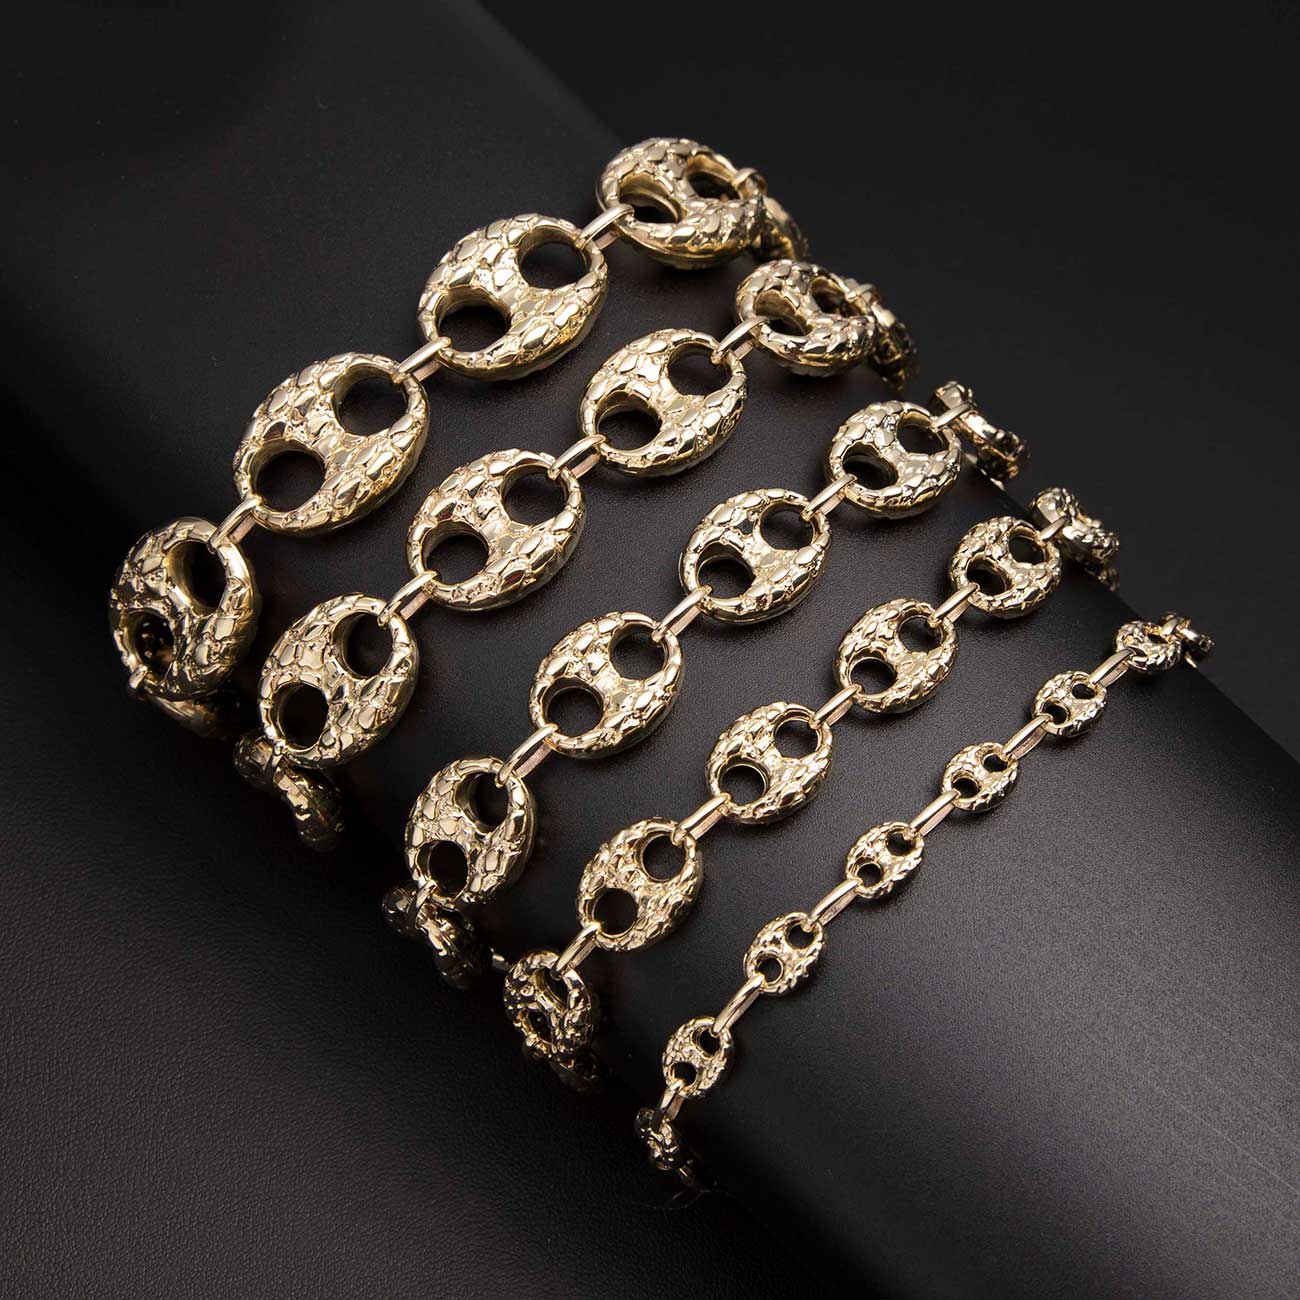 Women's Nugget Puffed Gucci Link Chain Bracelet 10K Yellow Gold - Hollow